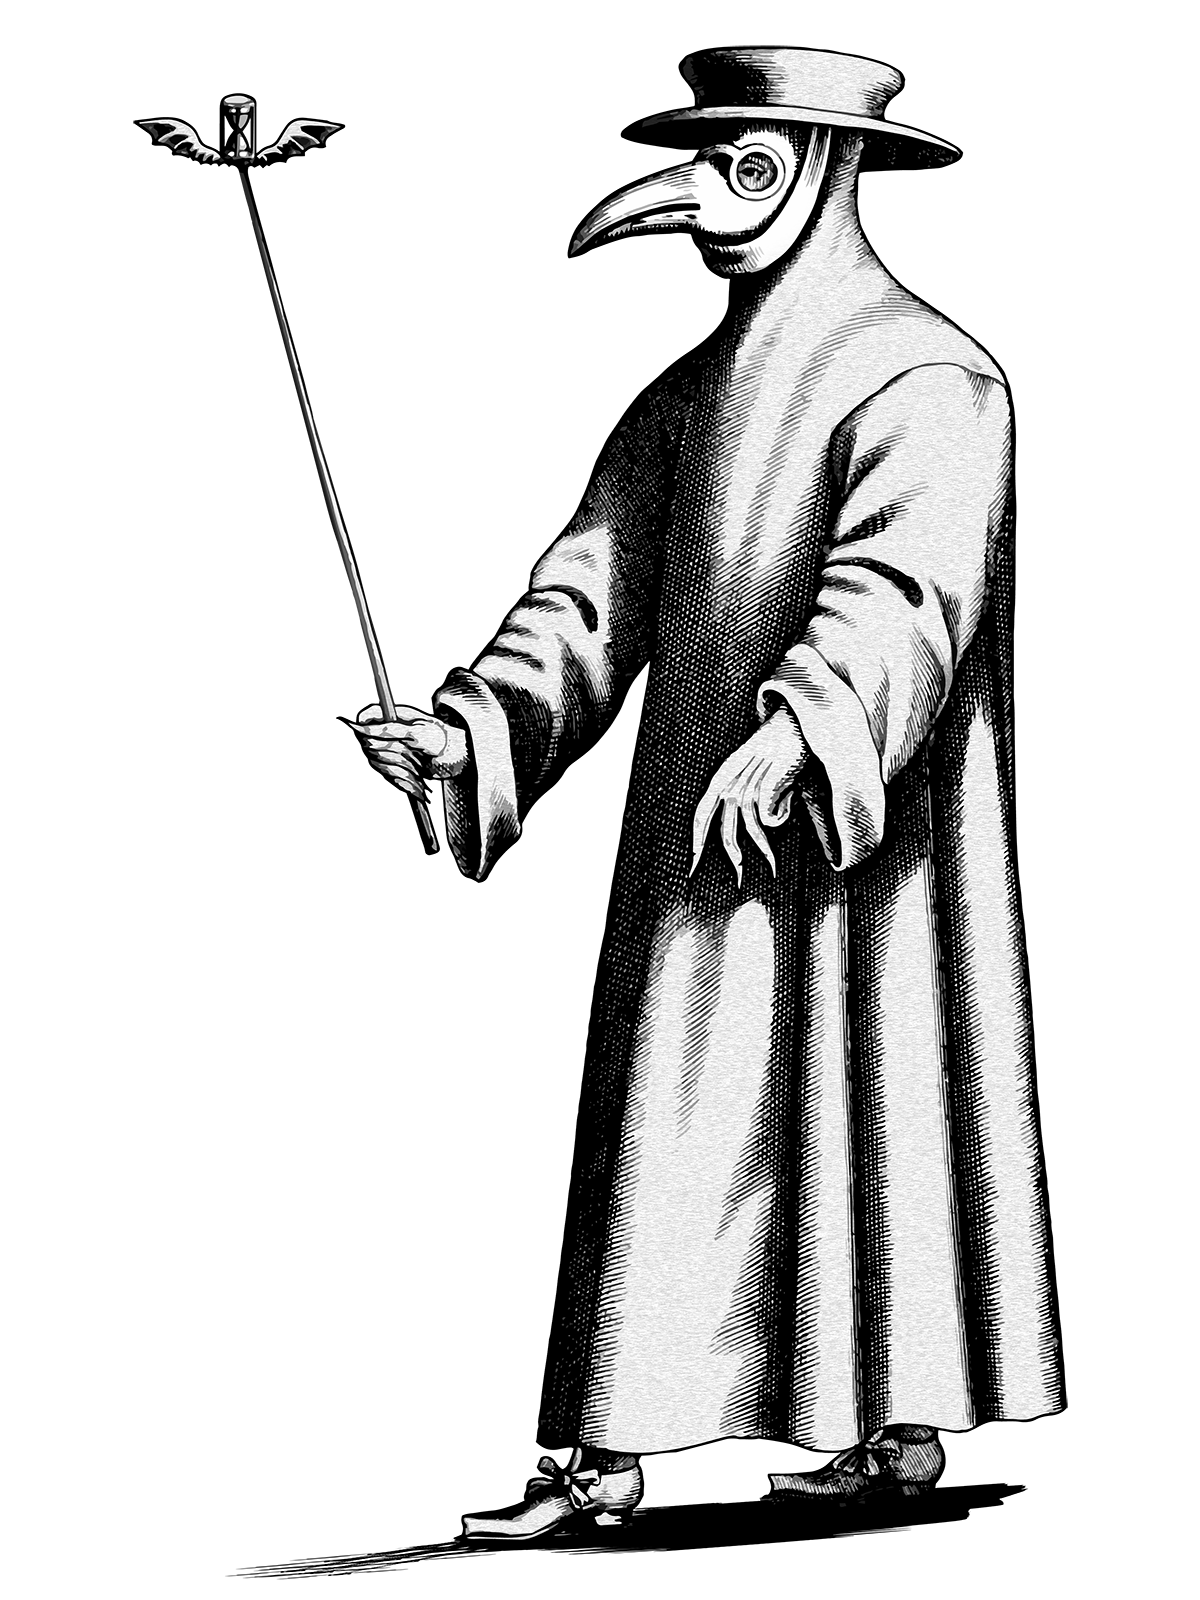 who created the plague doctor